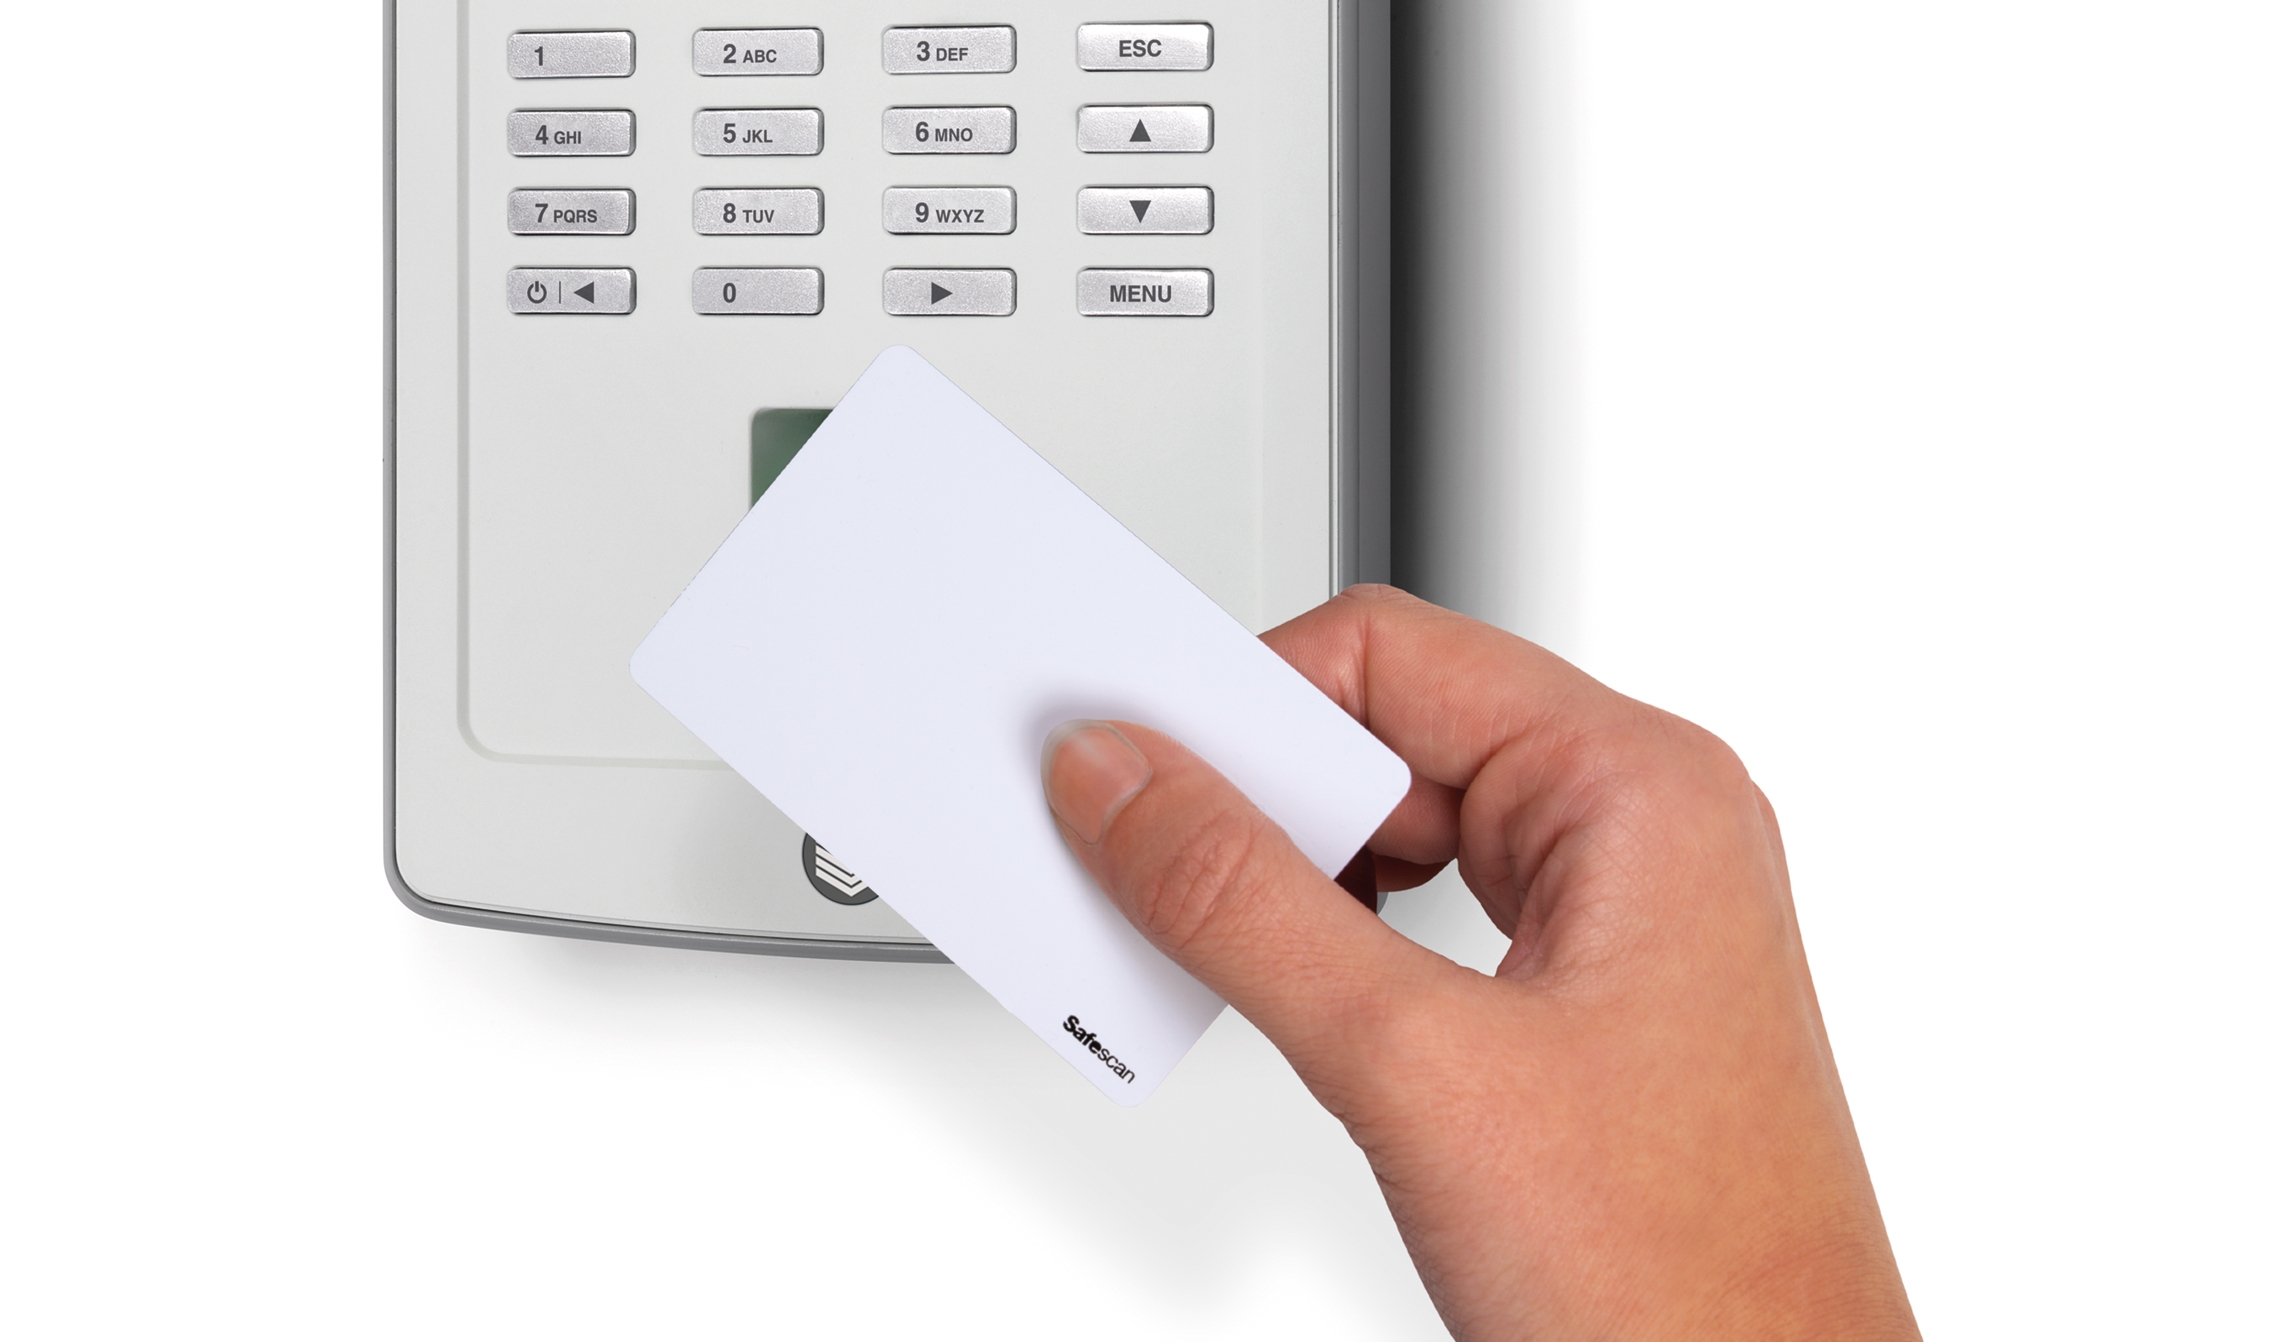 work clock in and out proximitt card rfid